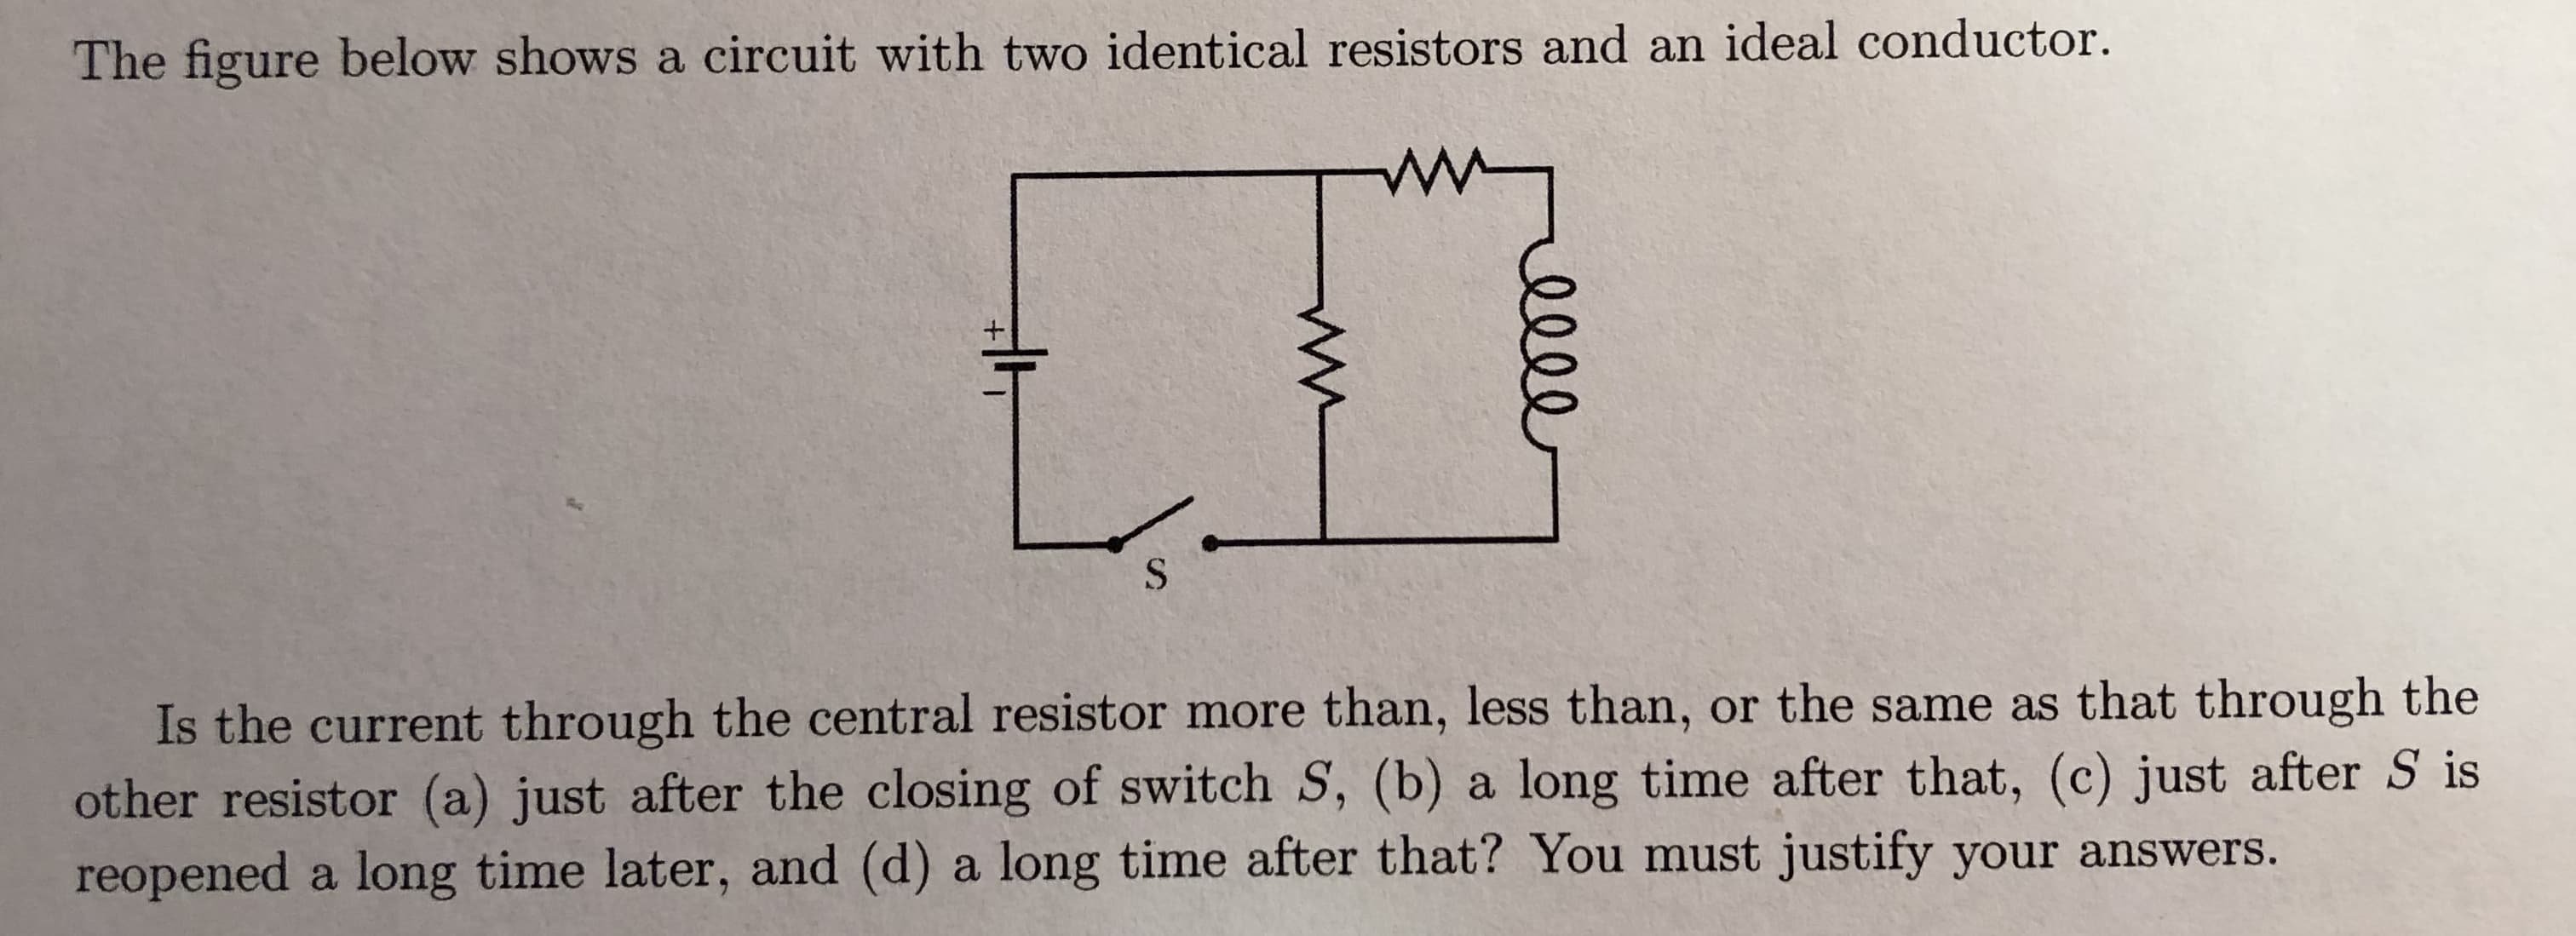 The figure below shows a circuit with two identical resistors and an ideal conductor
Is the current through the central resistor more than, less than, or the same as that through the
other resistor (a) just after the closing of switch S, (b) a long time after that, (c) just after S is
reopened a long time later, and (d) a long time after that? You must justify your answers.
